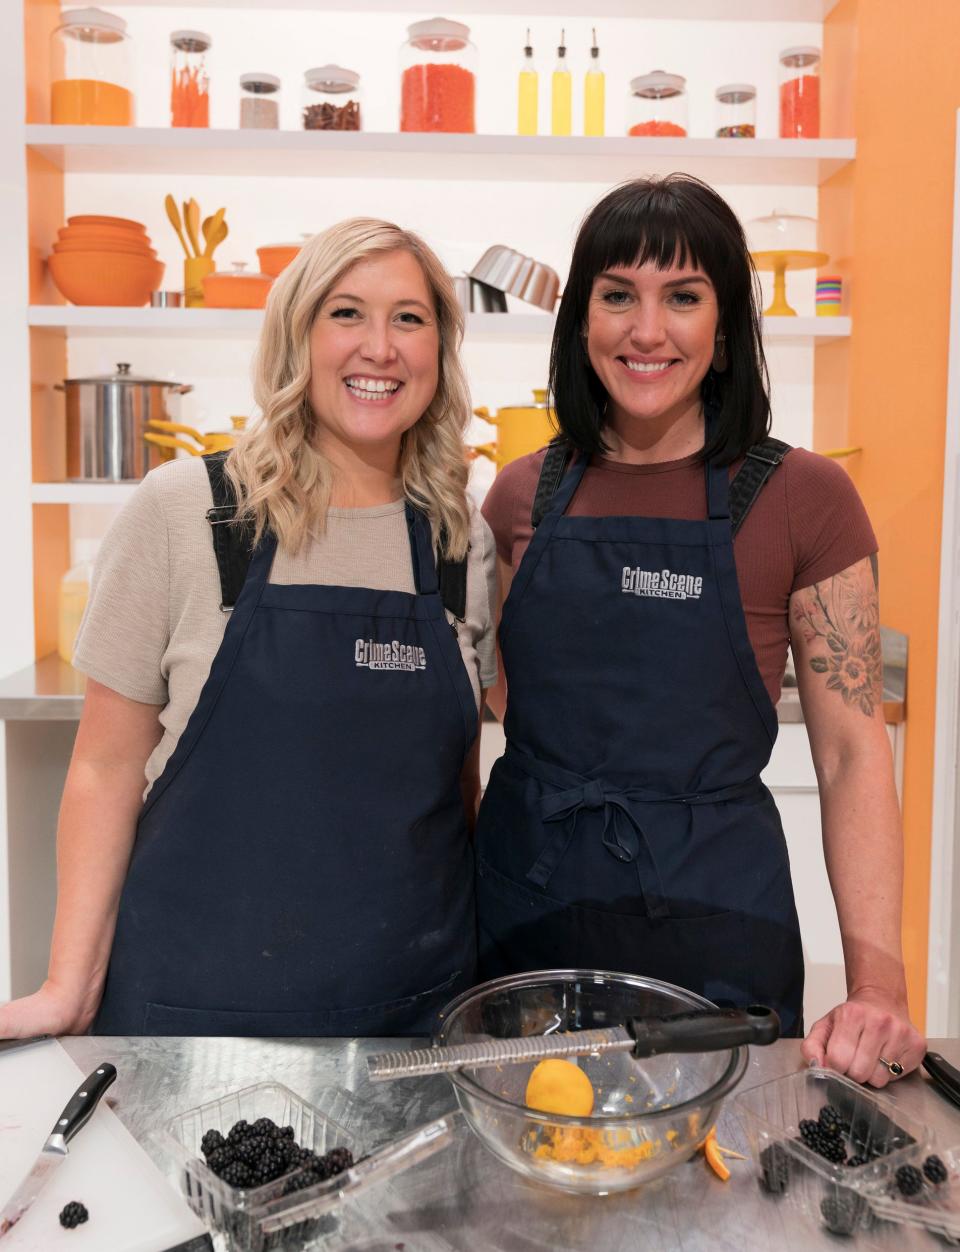 Contestants Kathleen Regelman, left, and Hannah Reyes will appear on the second season of the Fox reality cooking competition "Crime Scene Kitchen," which premieres at 8 p.m. June 5. Regelman and Reyes are the owners of Cup & Cake and Kreger's Bakery in Wausau.